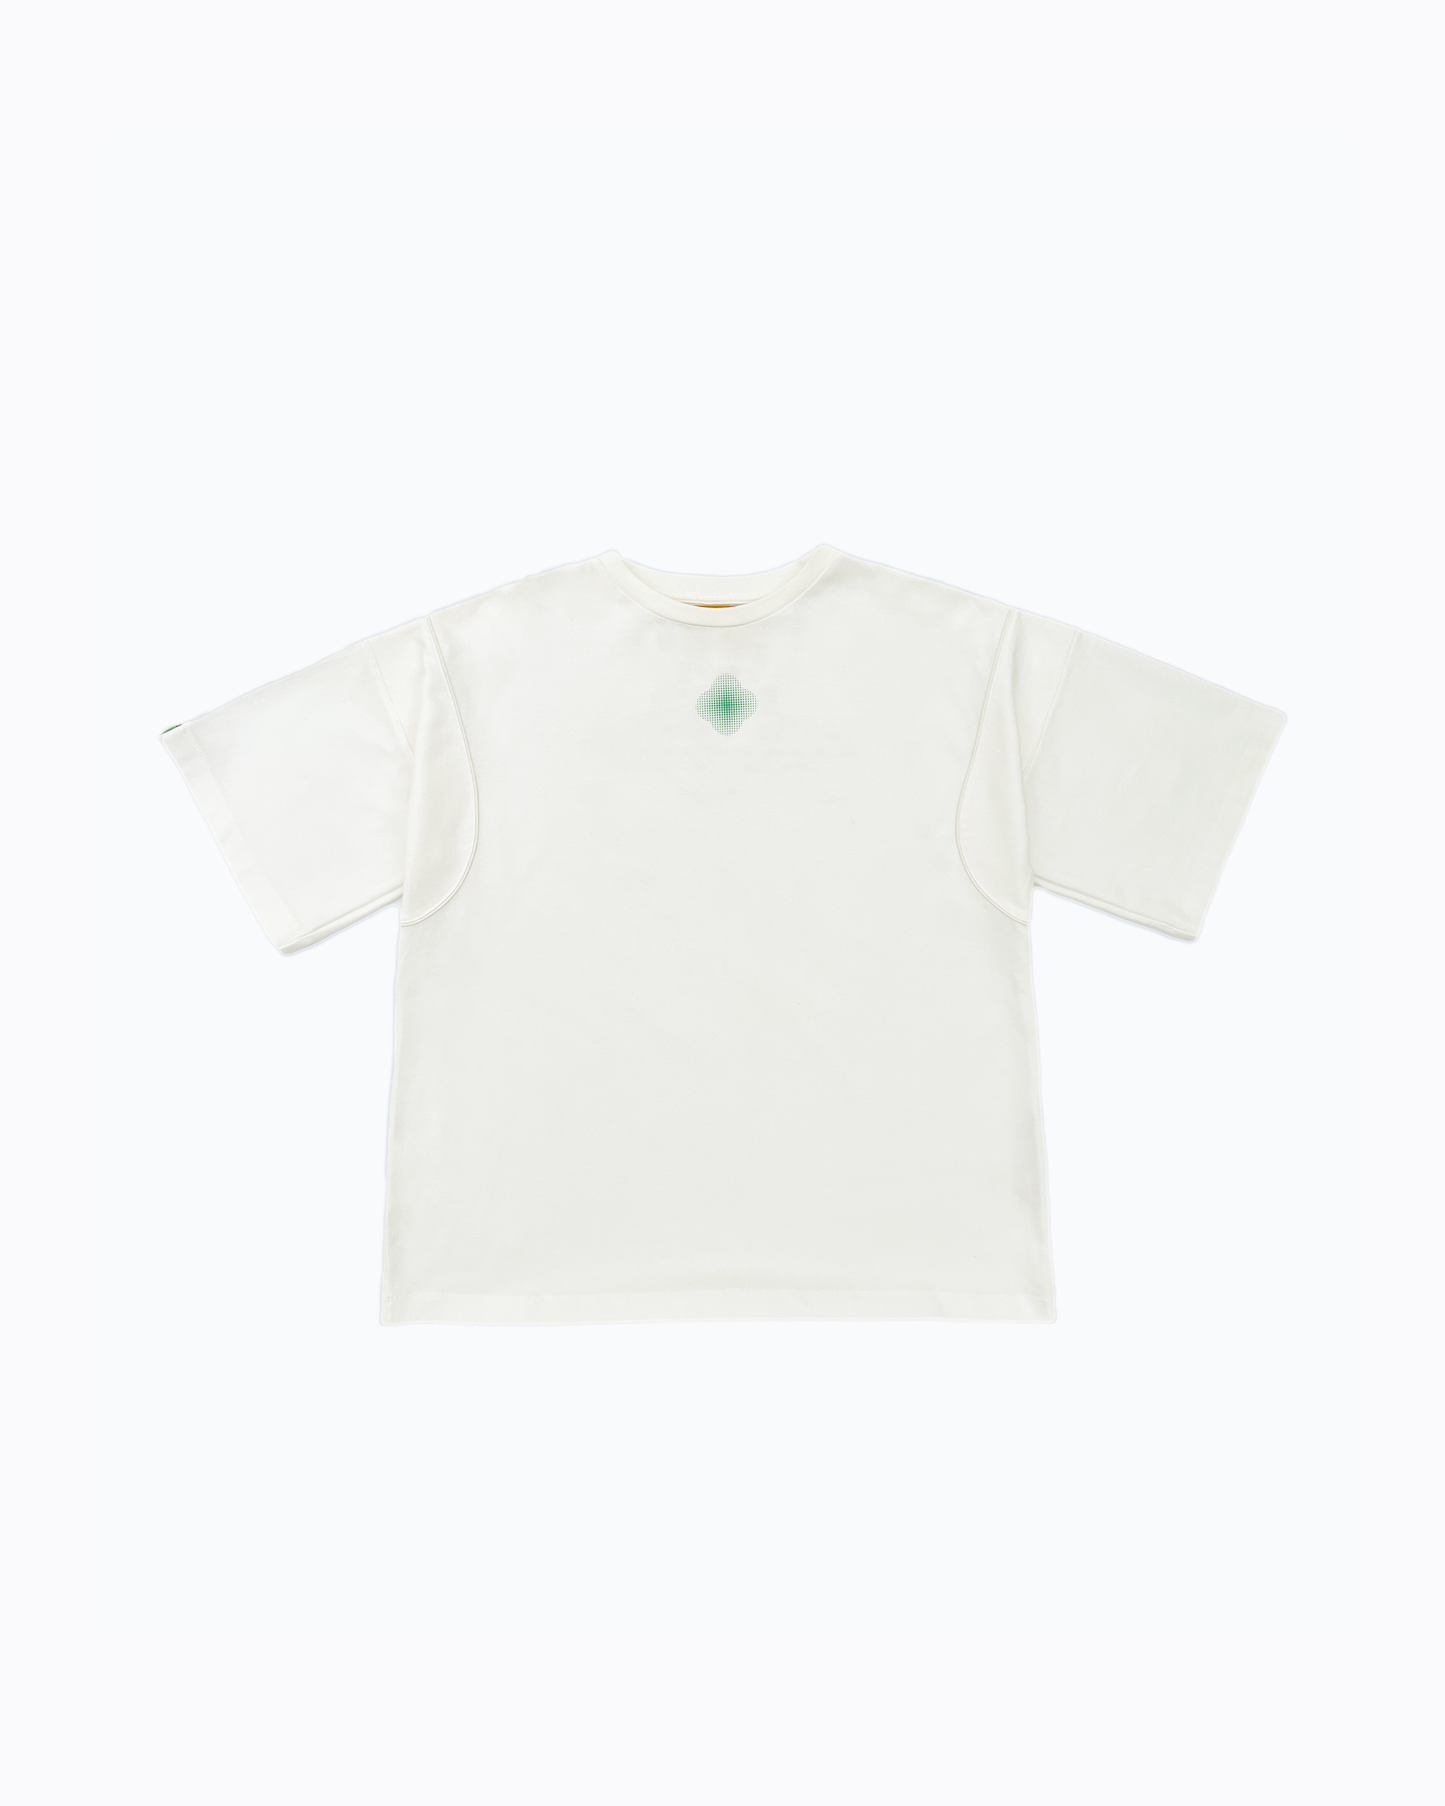 01 Patch Tee White